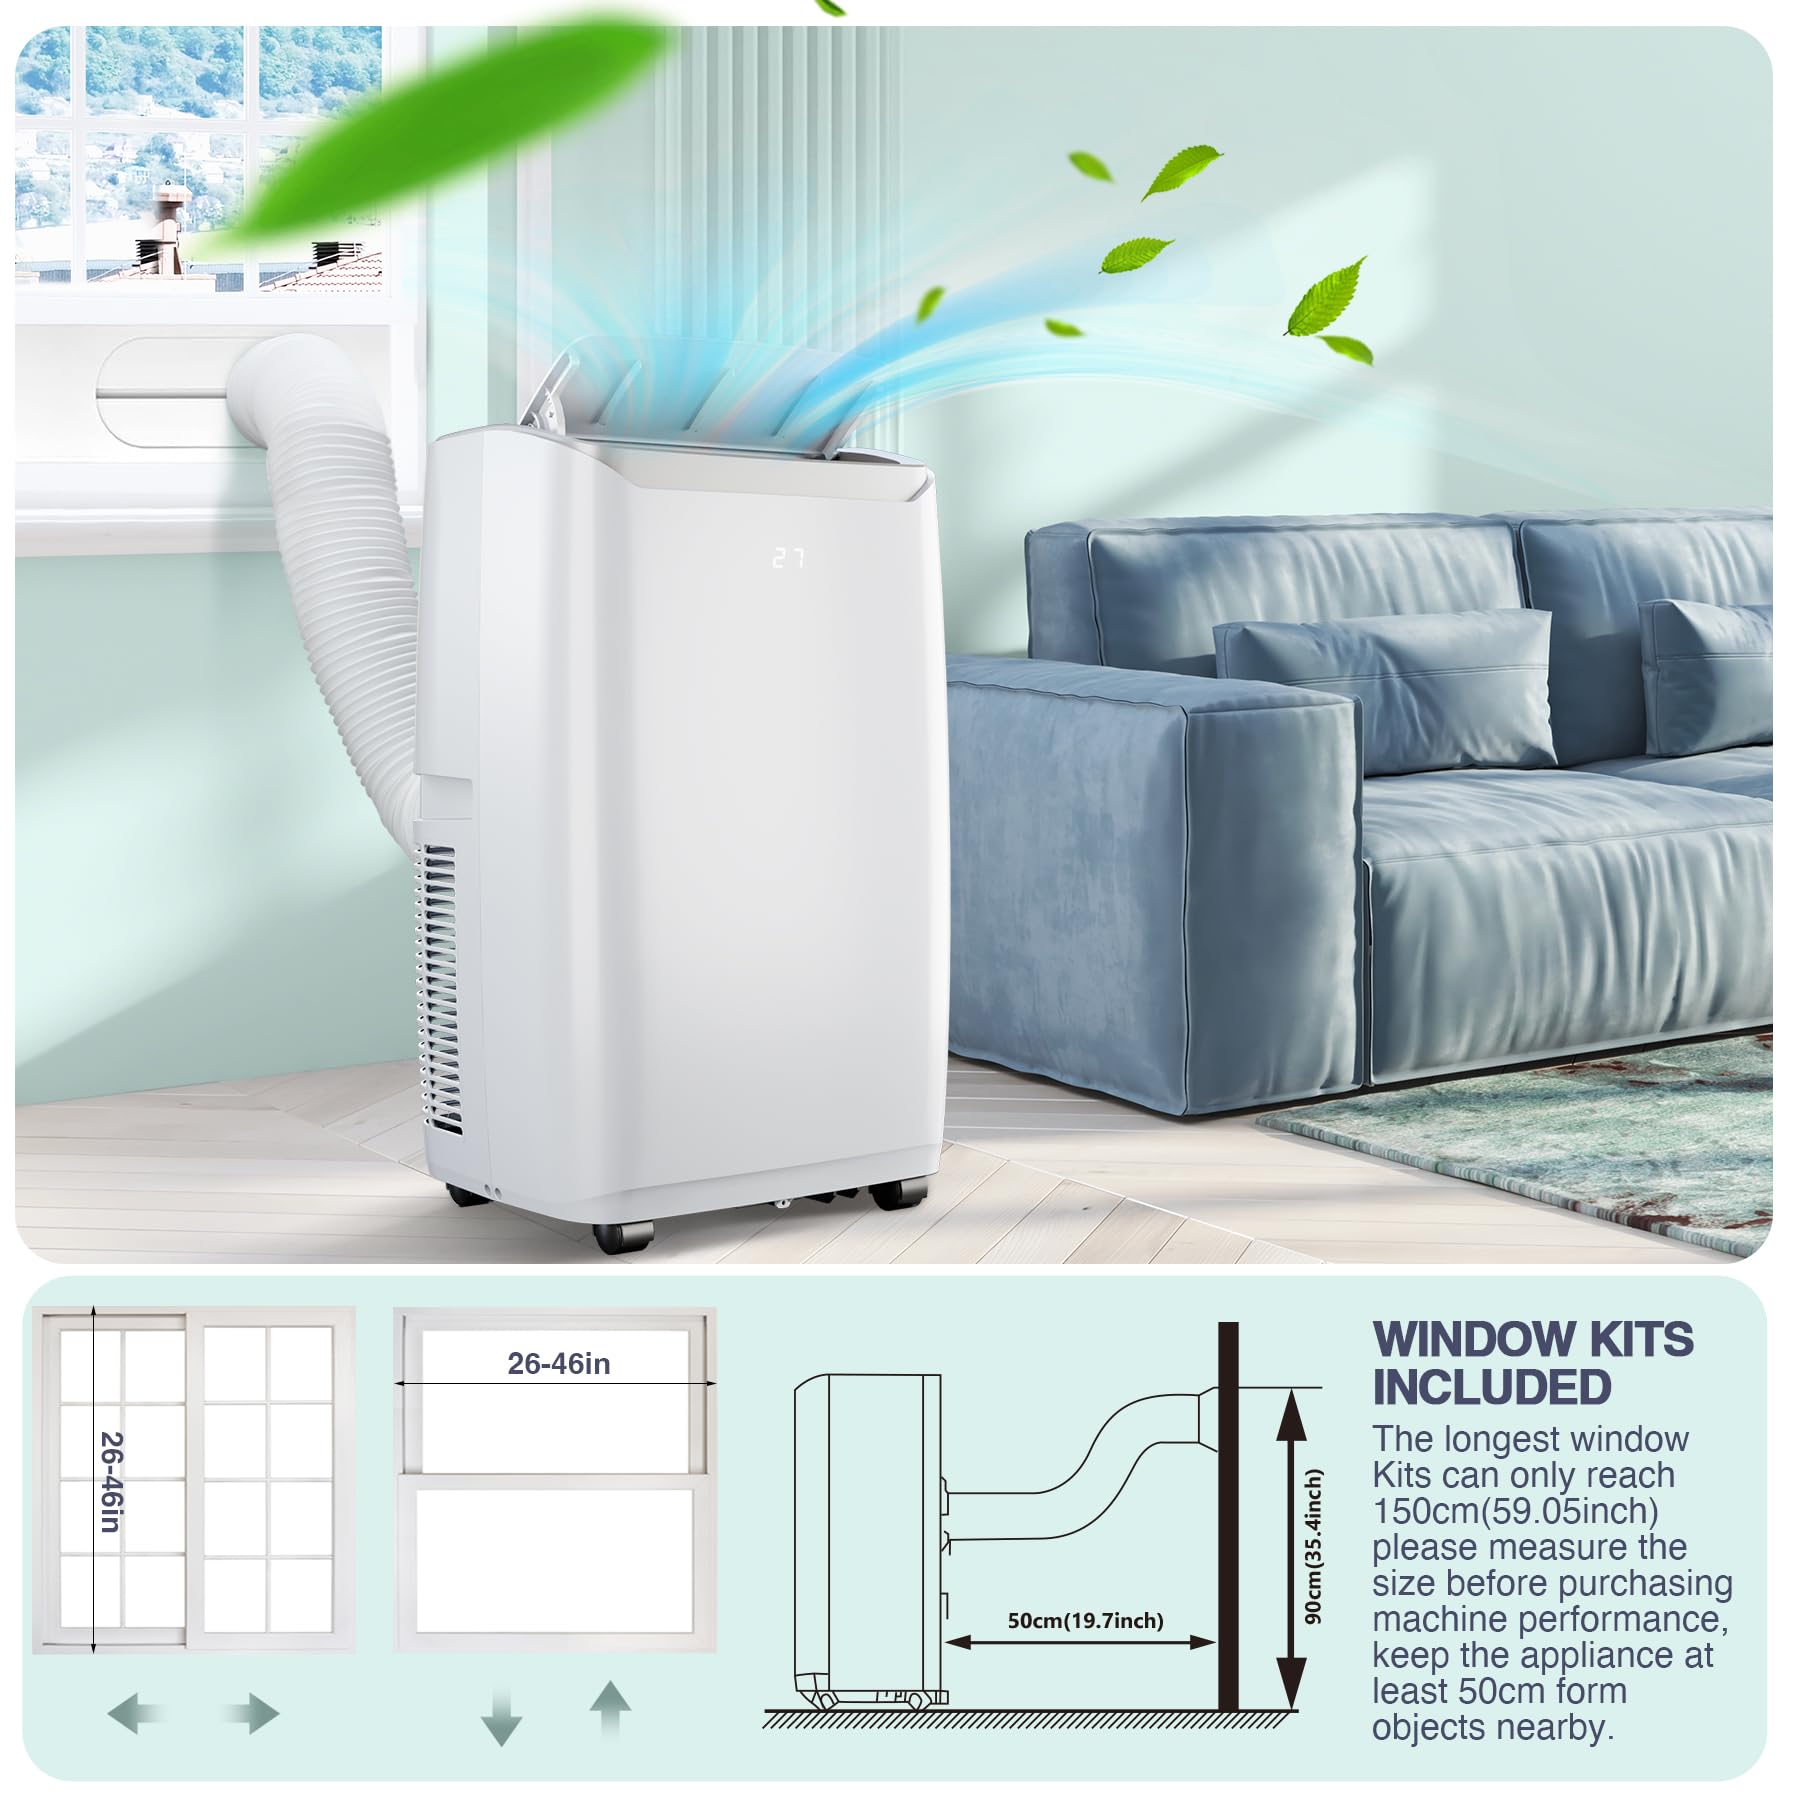 12,000 BTU Portable AC, Multi-Speed Fan for Room Cooling